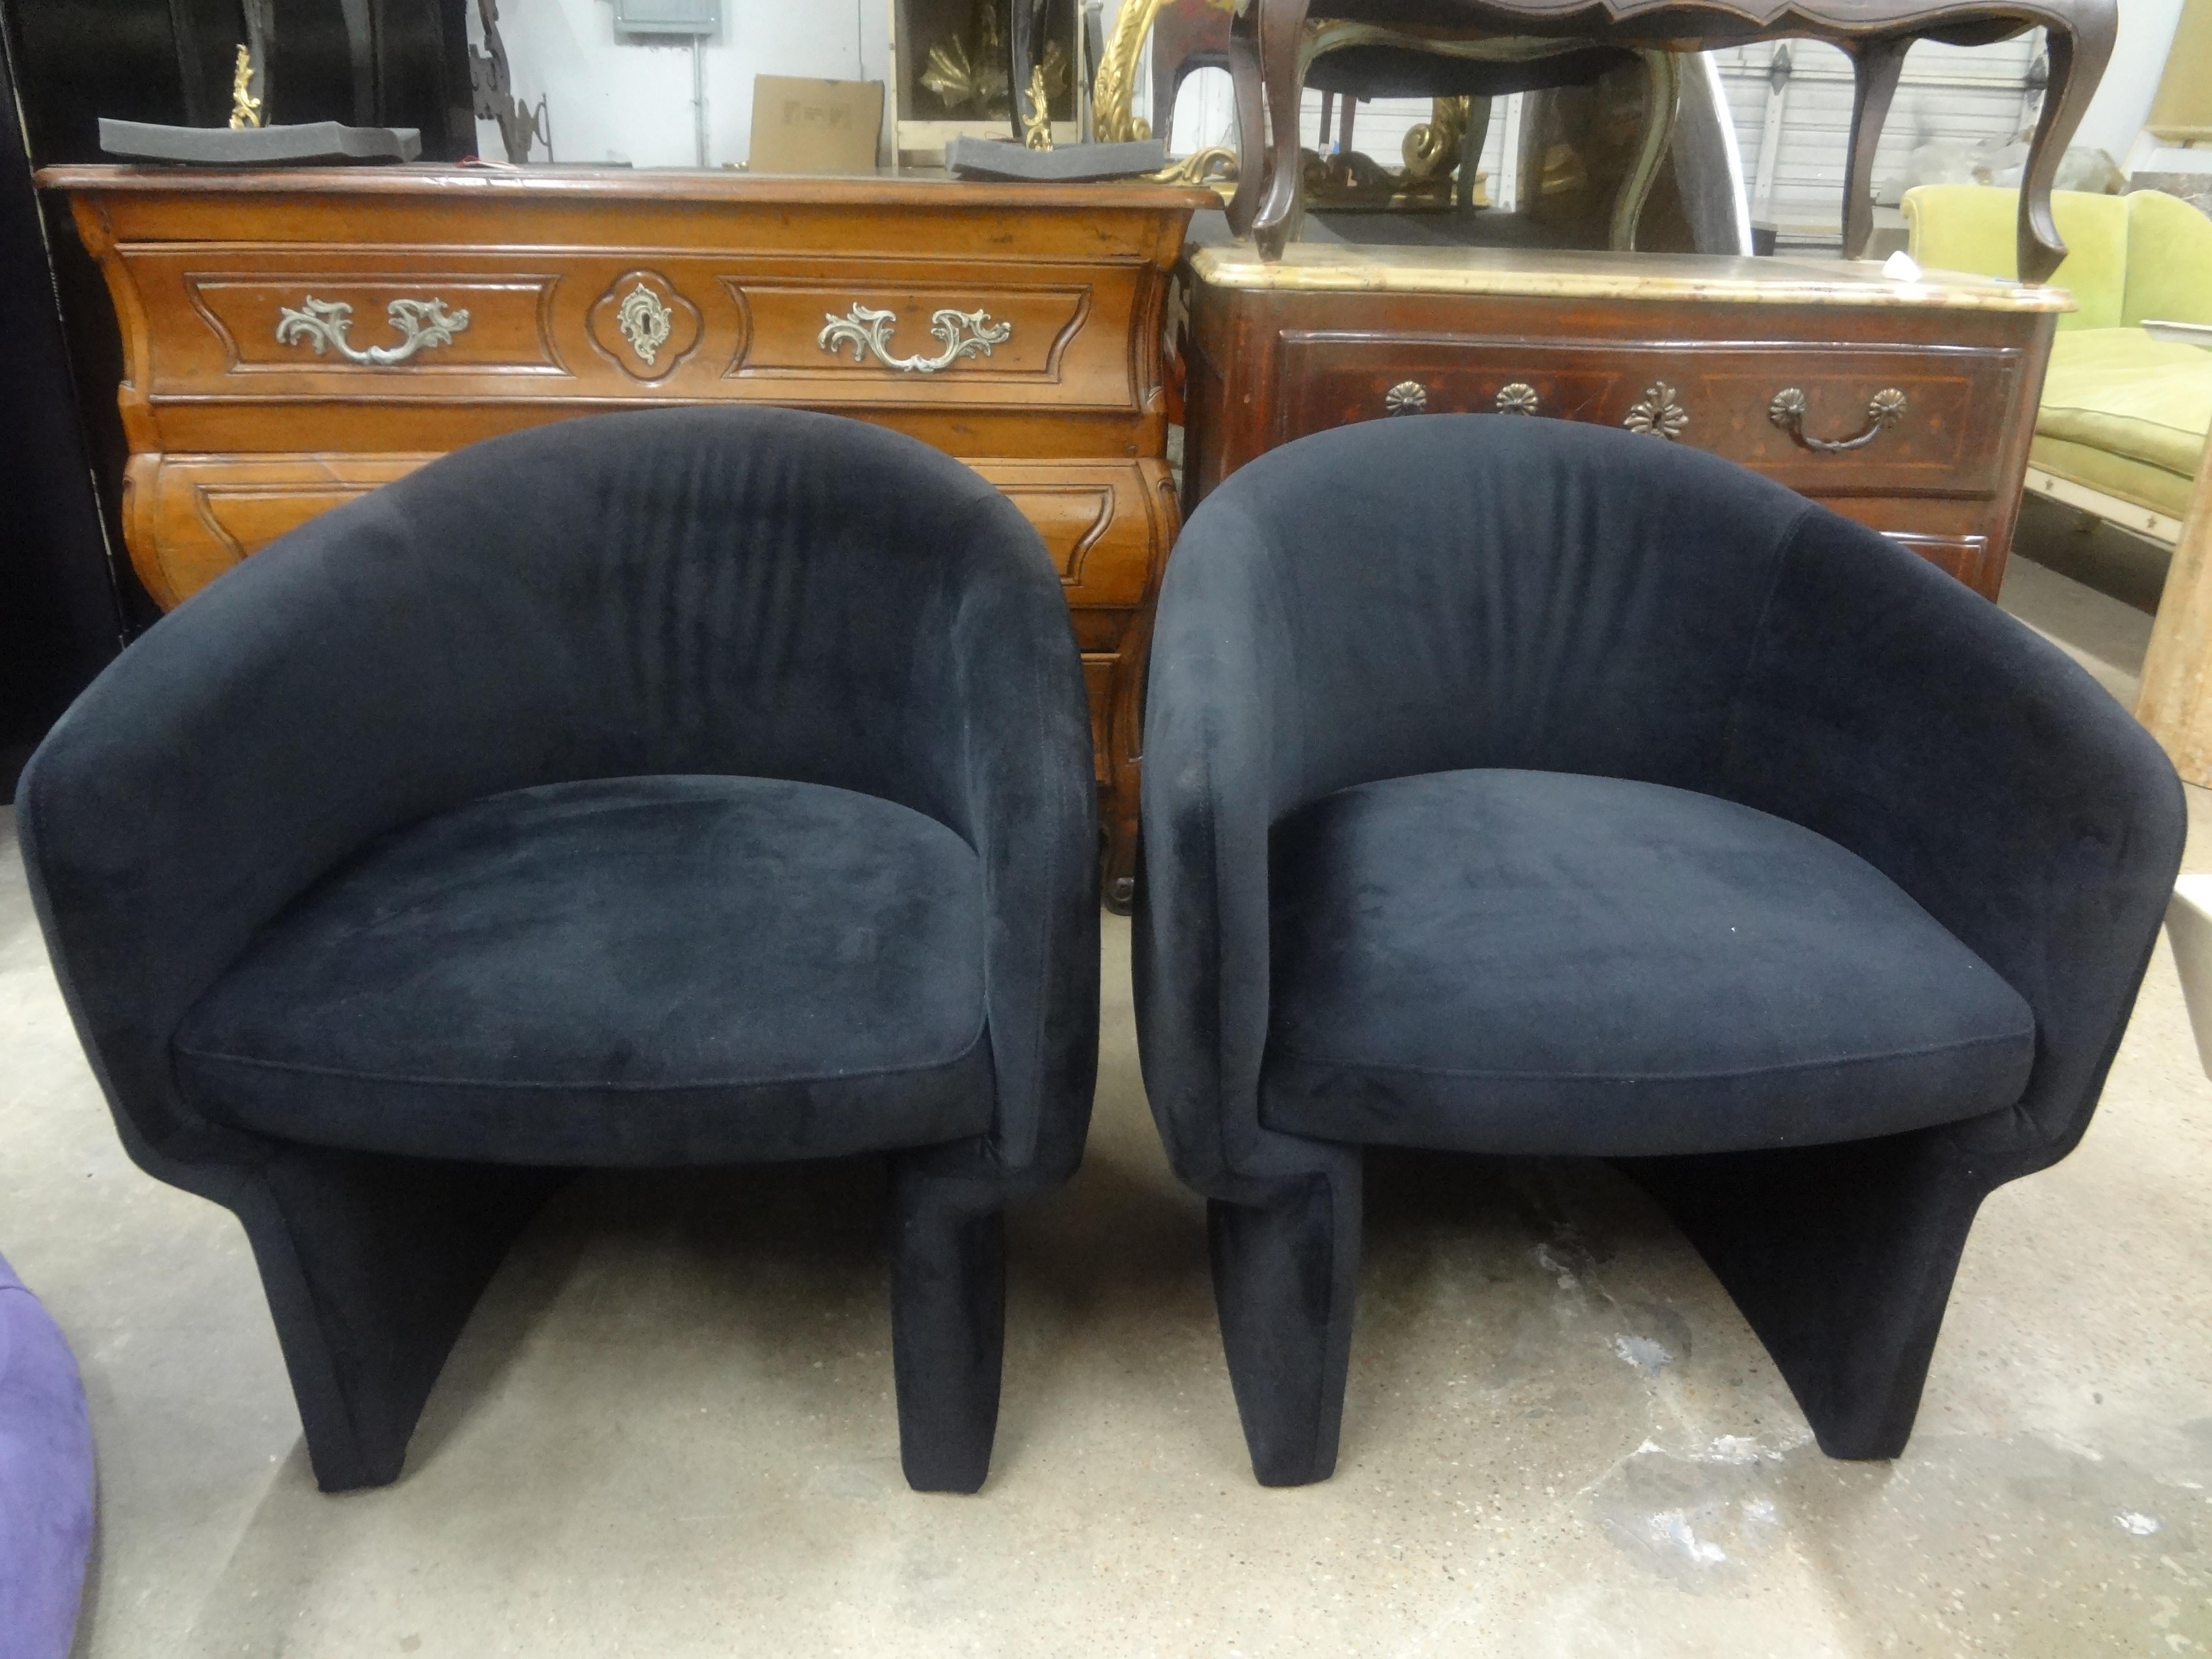  Pair Of Postmodern Lounge Chairs On Plinths.
This shapely pair of Post Modern lounge chairs, tub chairs or club chairs are mounted on unusual plinths and retain their original black velvet upholstery.
These Milo Baughman for Directional style